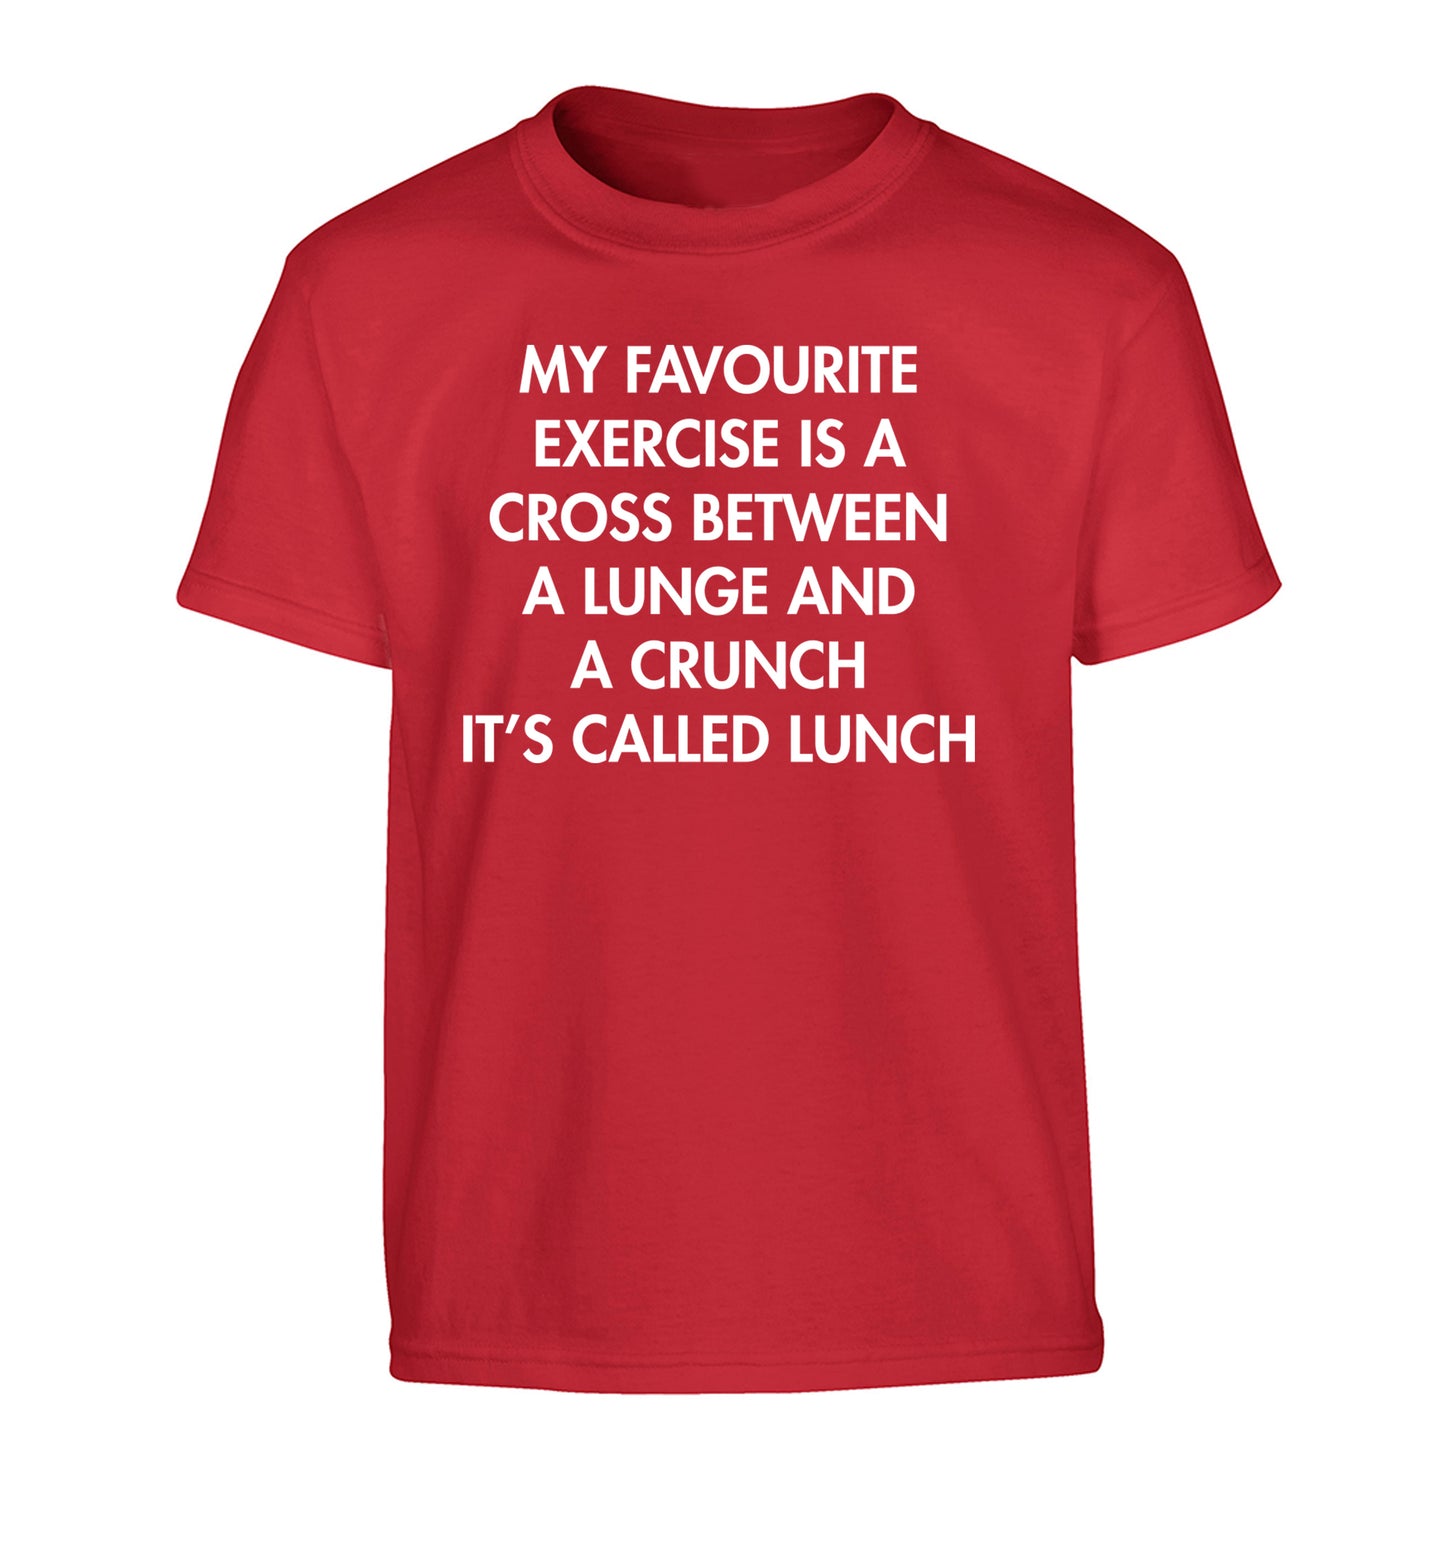 My favourite exercise is a cross between a lung and a crunch it's called lunch Children's red Tshirt 12-14 Years